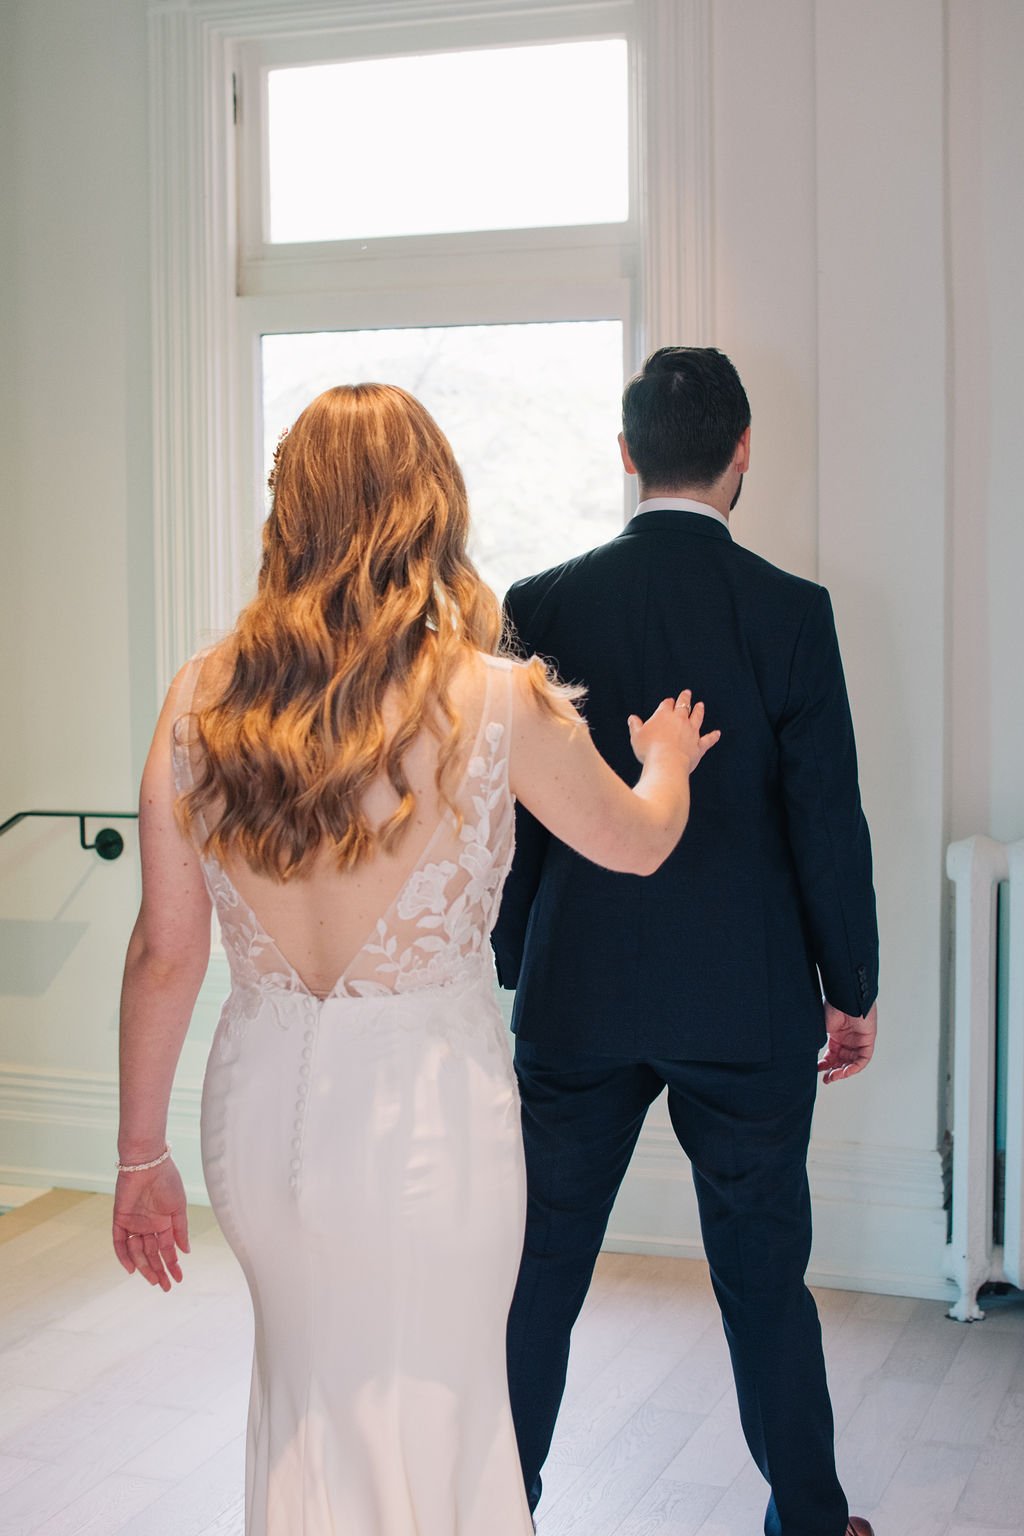 Bride and groom have their wedding day first look at Toronto's Gladstone House Hotel, photographed by Toronto wedding photographers, Ugo Photography